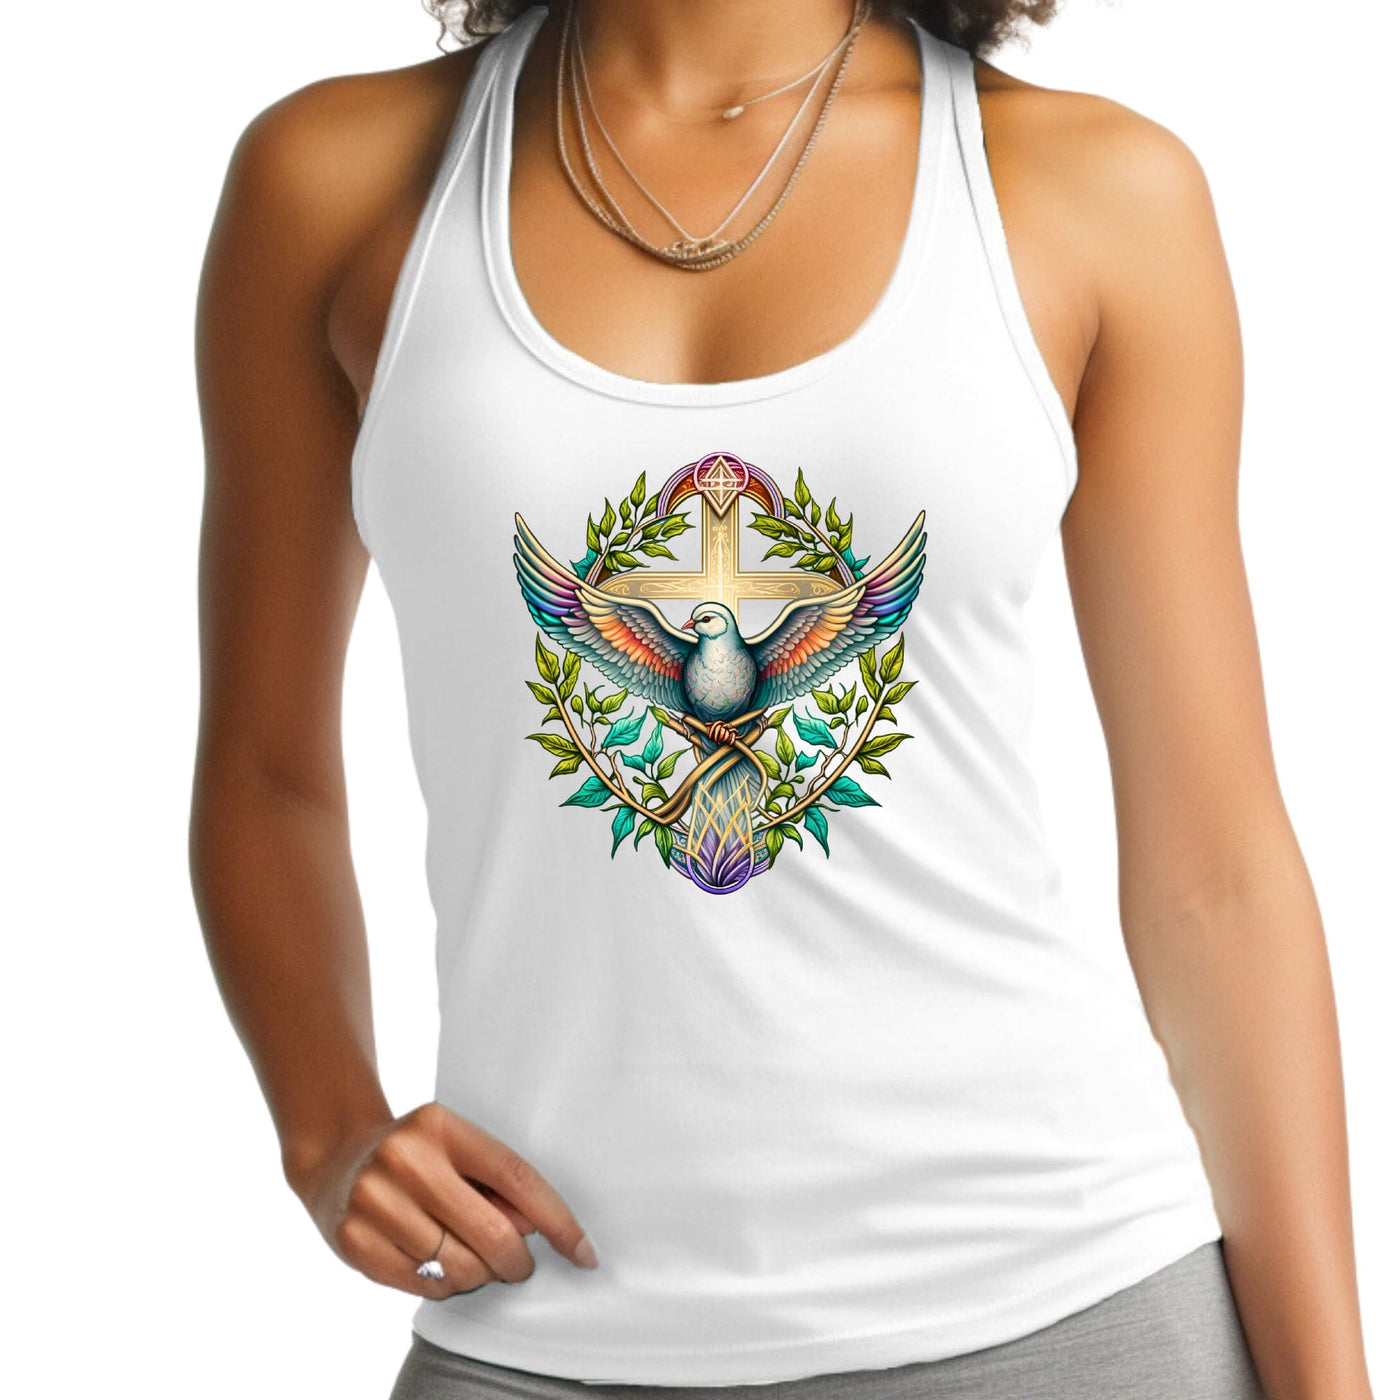 Womens Fitness Tank Top Graphic T-shirt Blue Green Multicolor Dove - Womens